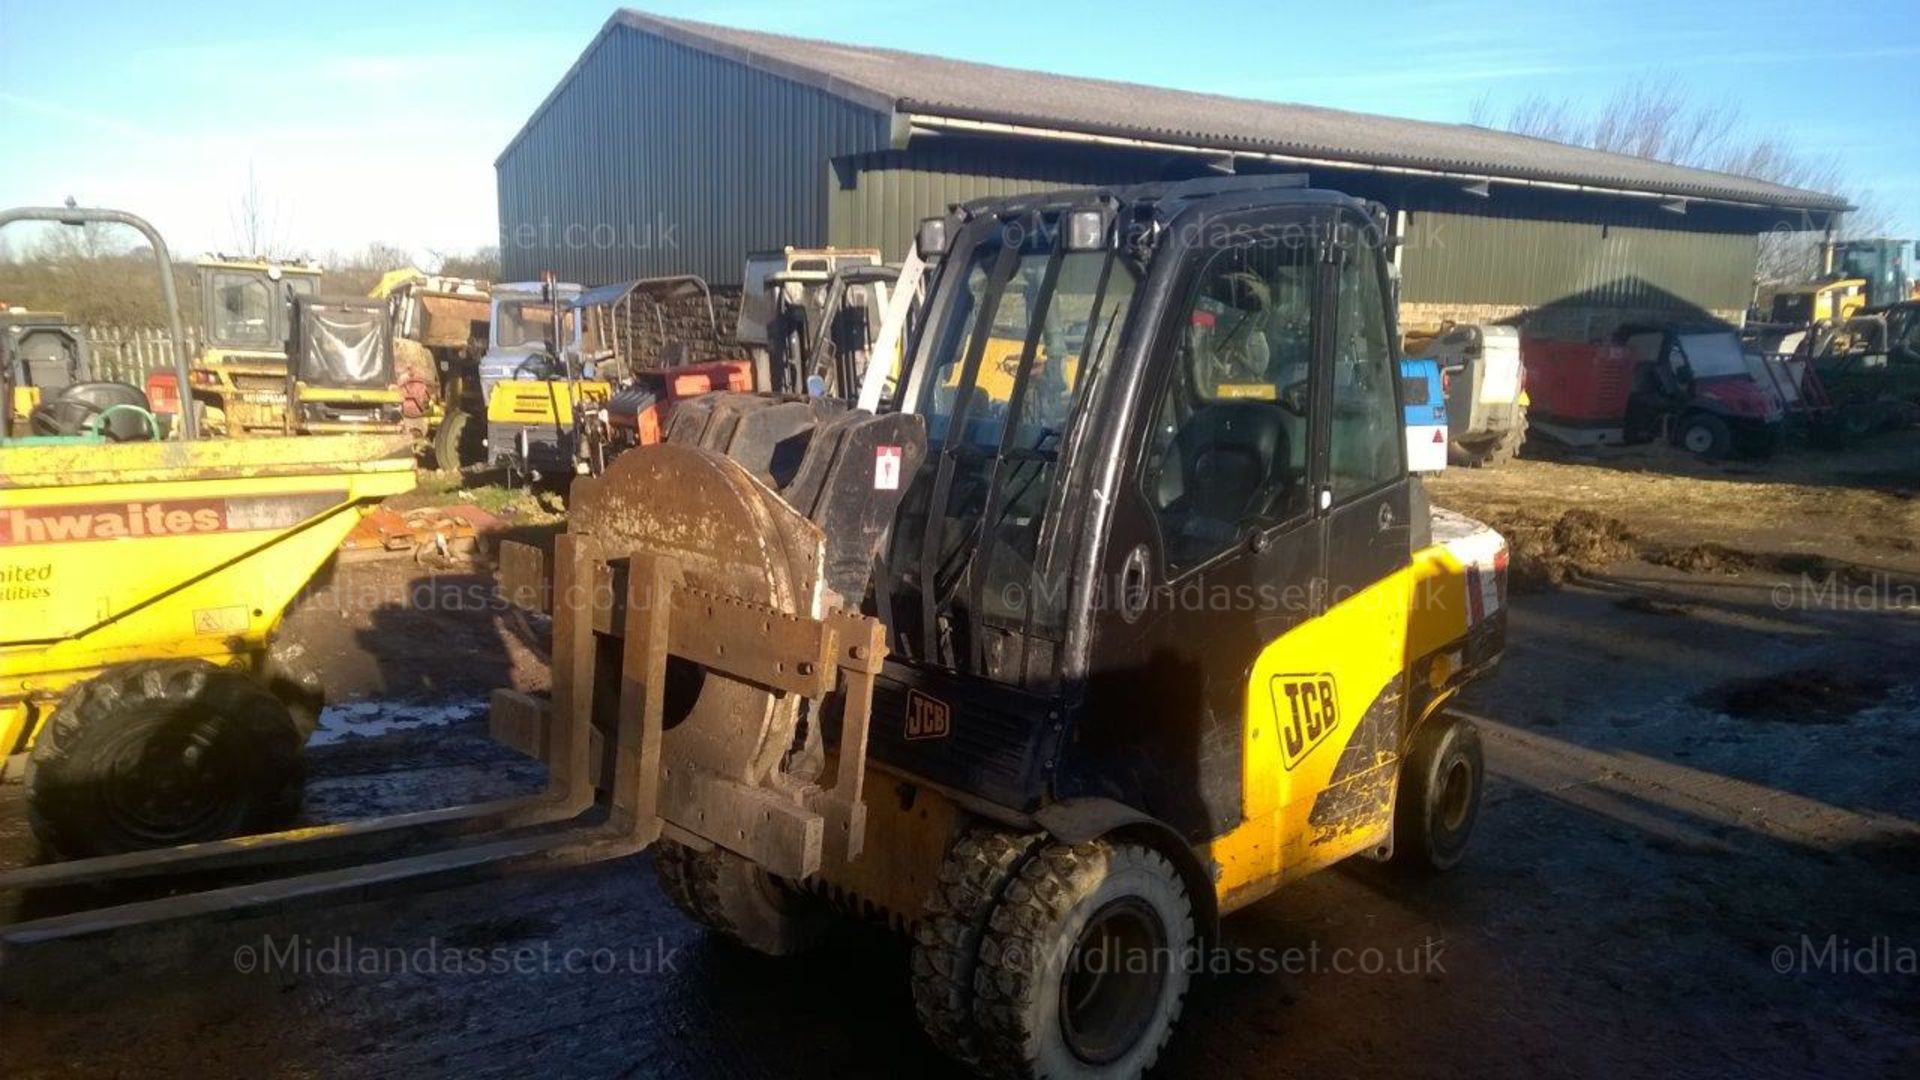 DS - 2009 JCB TELE TRUCK WITH ROTATOR   YEAR OF MANUFACTURE: 2009 WEIGHT: 5200 kg   FULL CAB ROTATOR